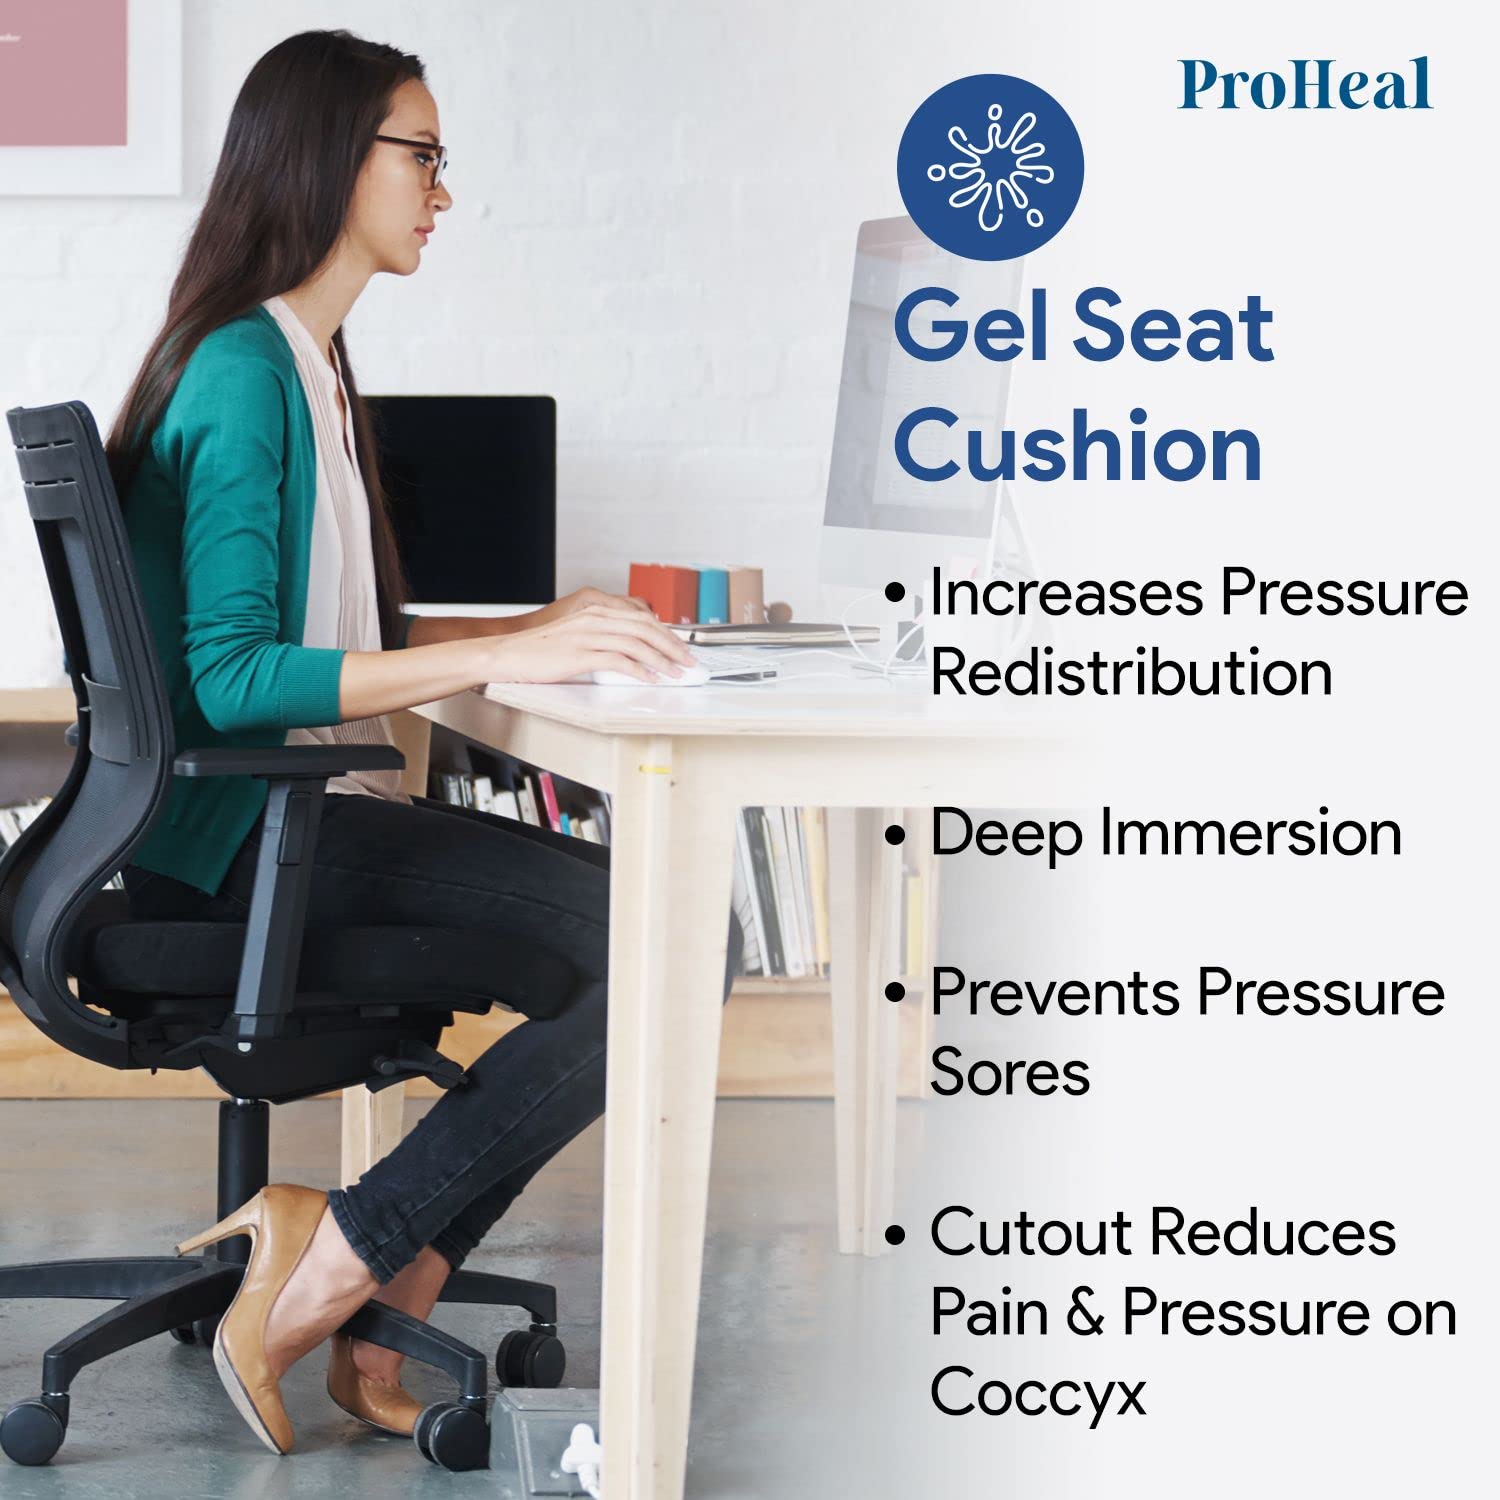 Gel Coccyx Wheelchair Seat Cushion - Tailbone Pressure and Pain Relief - Gel Infused High Density and Resilient Foam with Coccyx Cut Out - 4" High Profile - 1 Year Warranty  - Like New